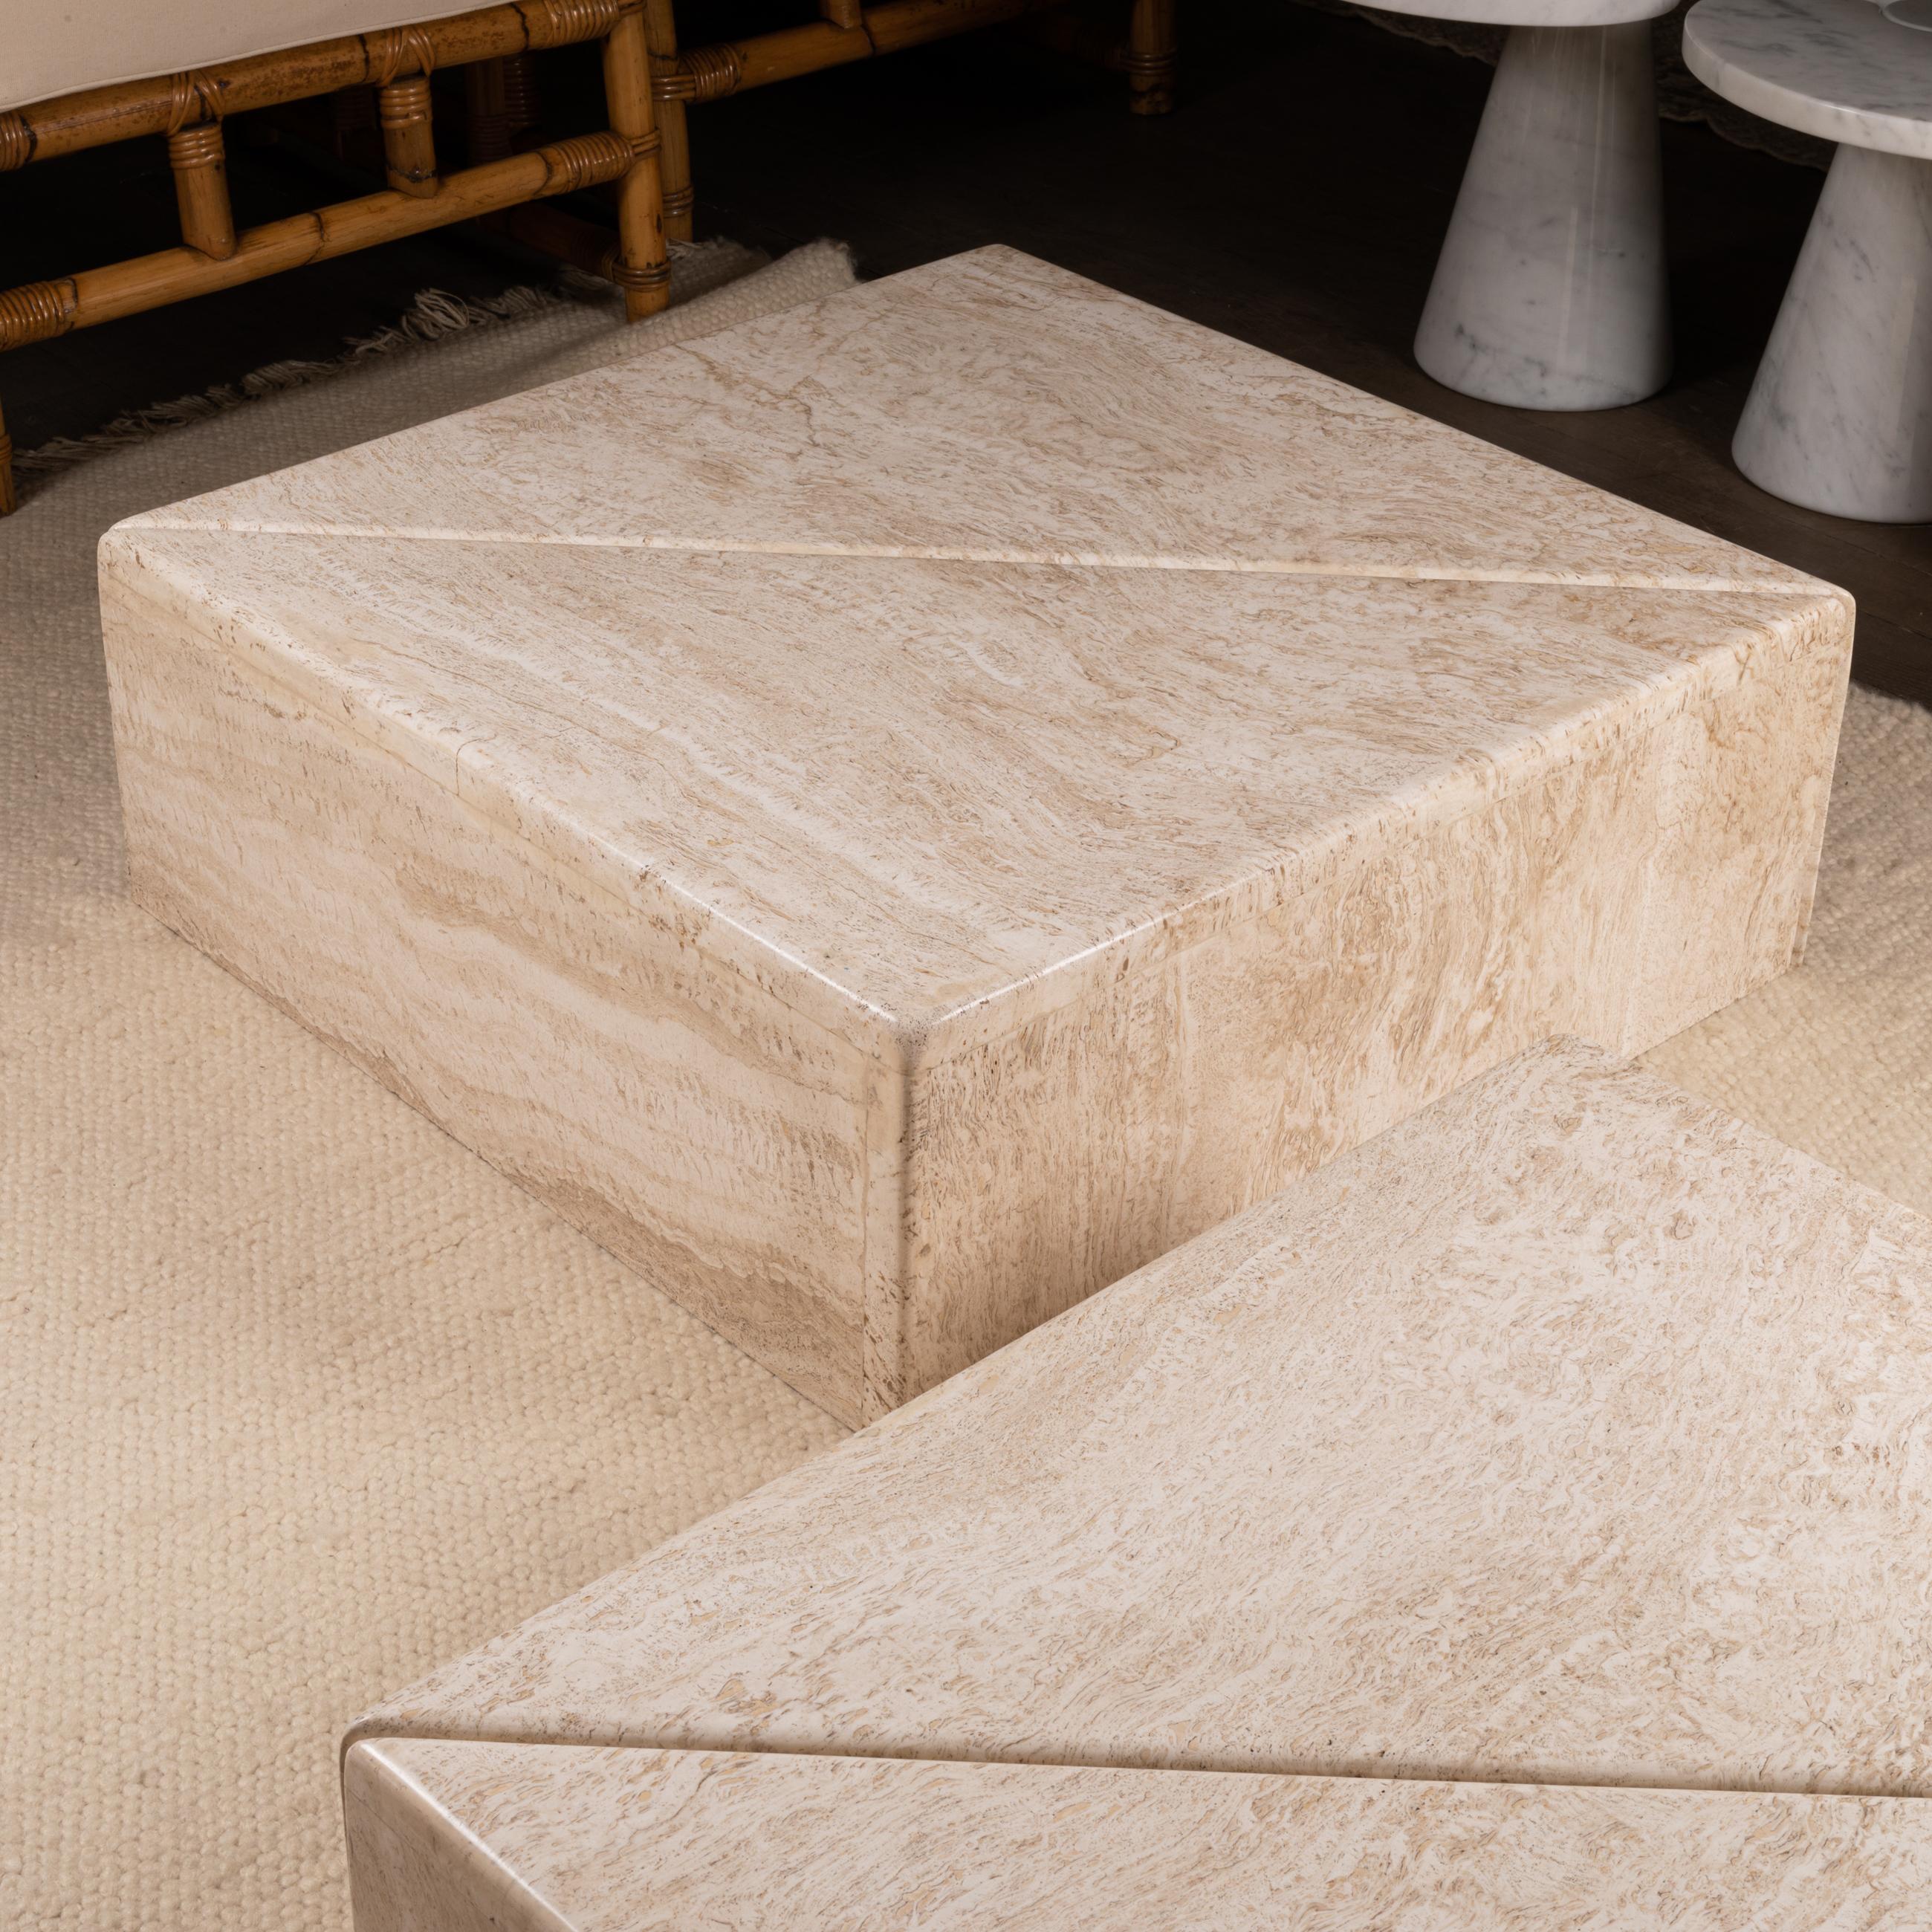 Set of Four Travertine Elements Forming One or More Coffee Tables 7